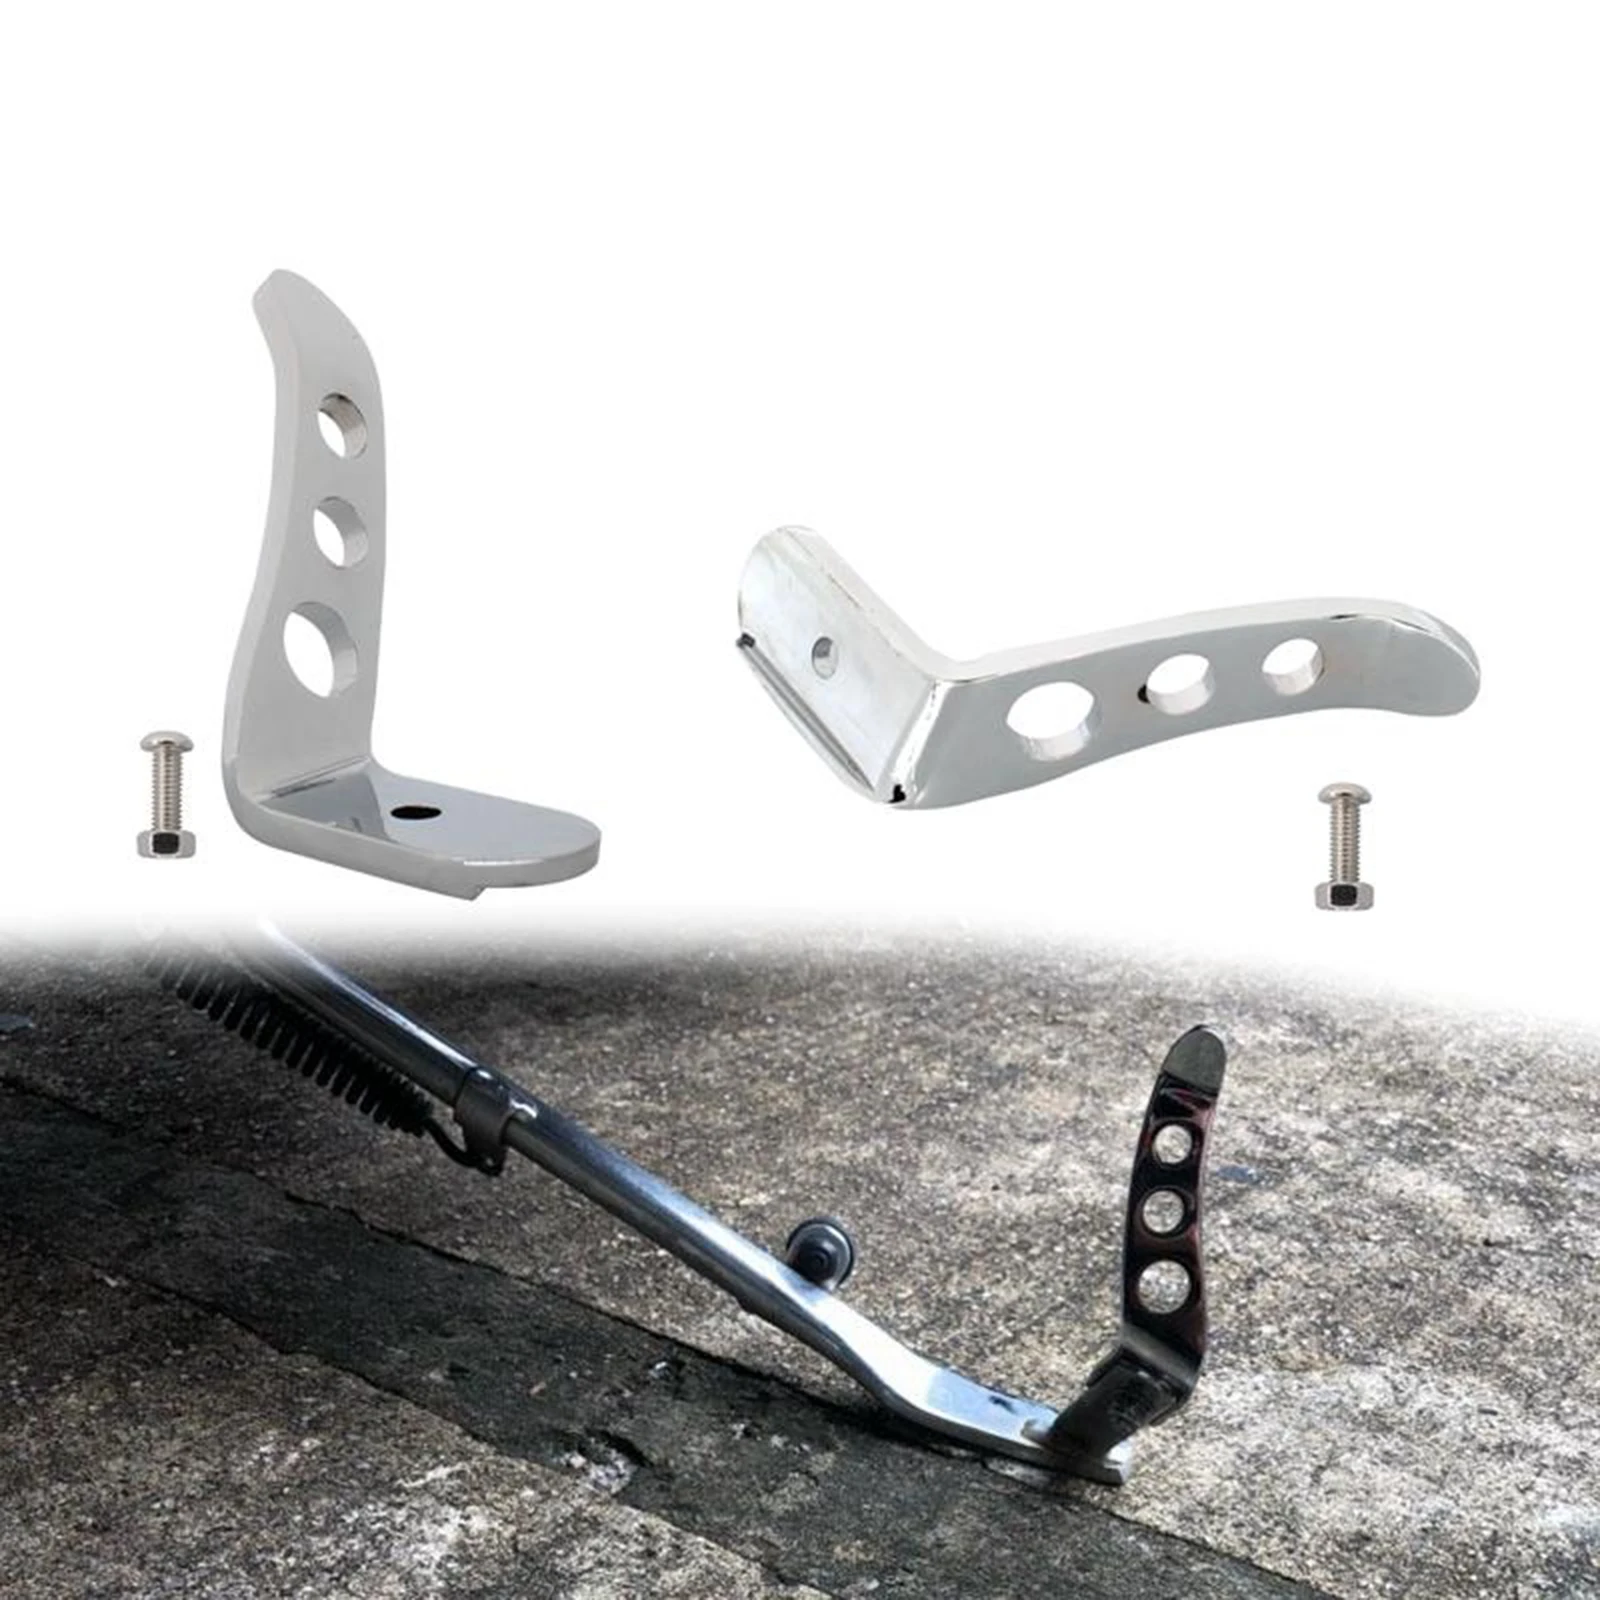 Motorcycle Kickstand Extension for Harley Touring 1991-2020 Made of high reliable quality and durable material